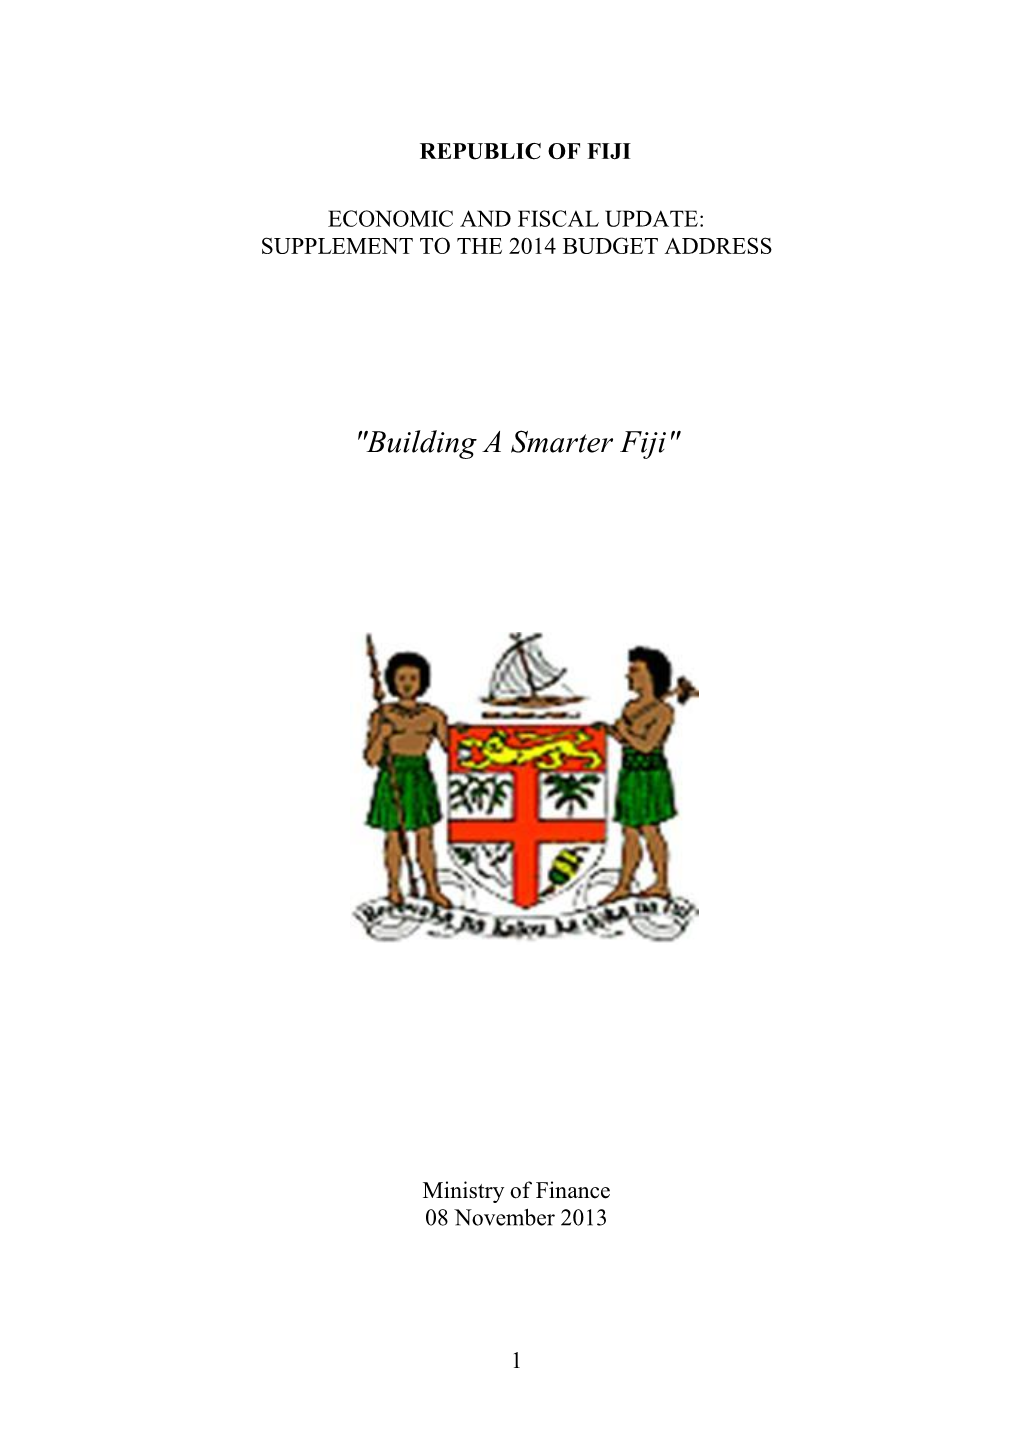 Supplement to the 2014 Budget Address